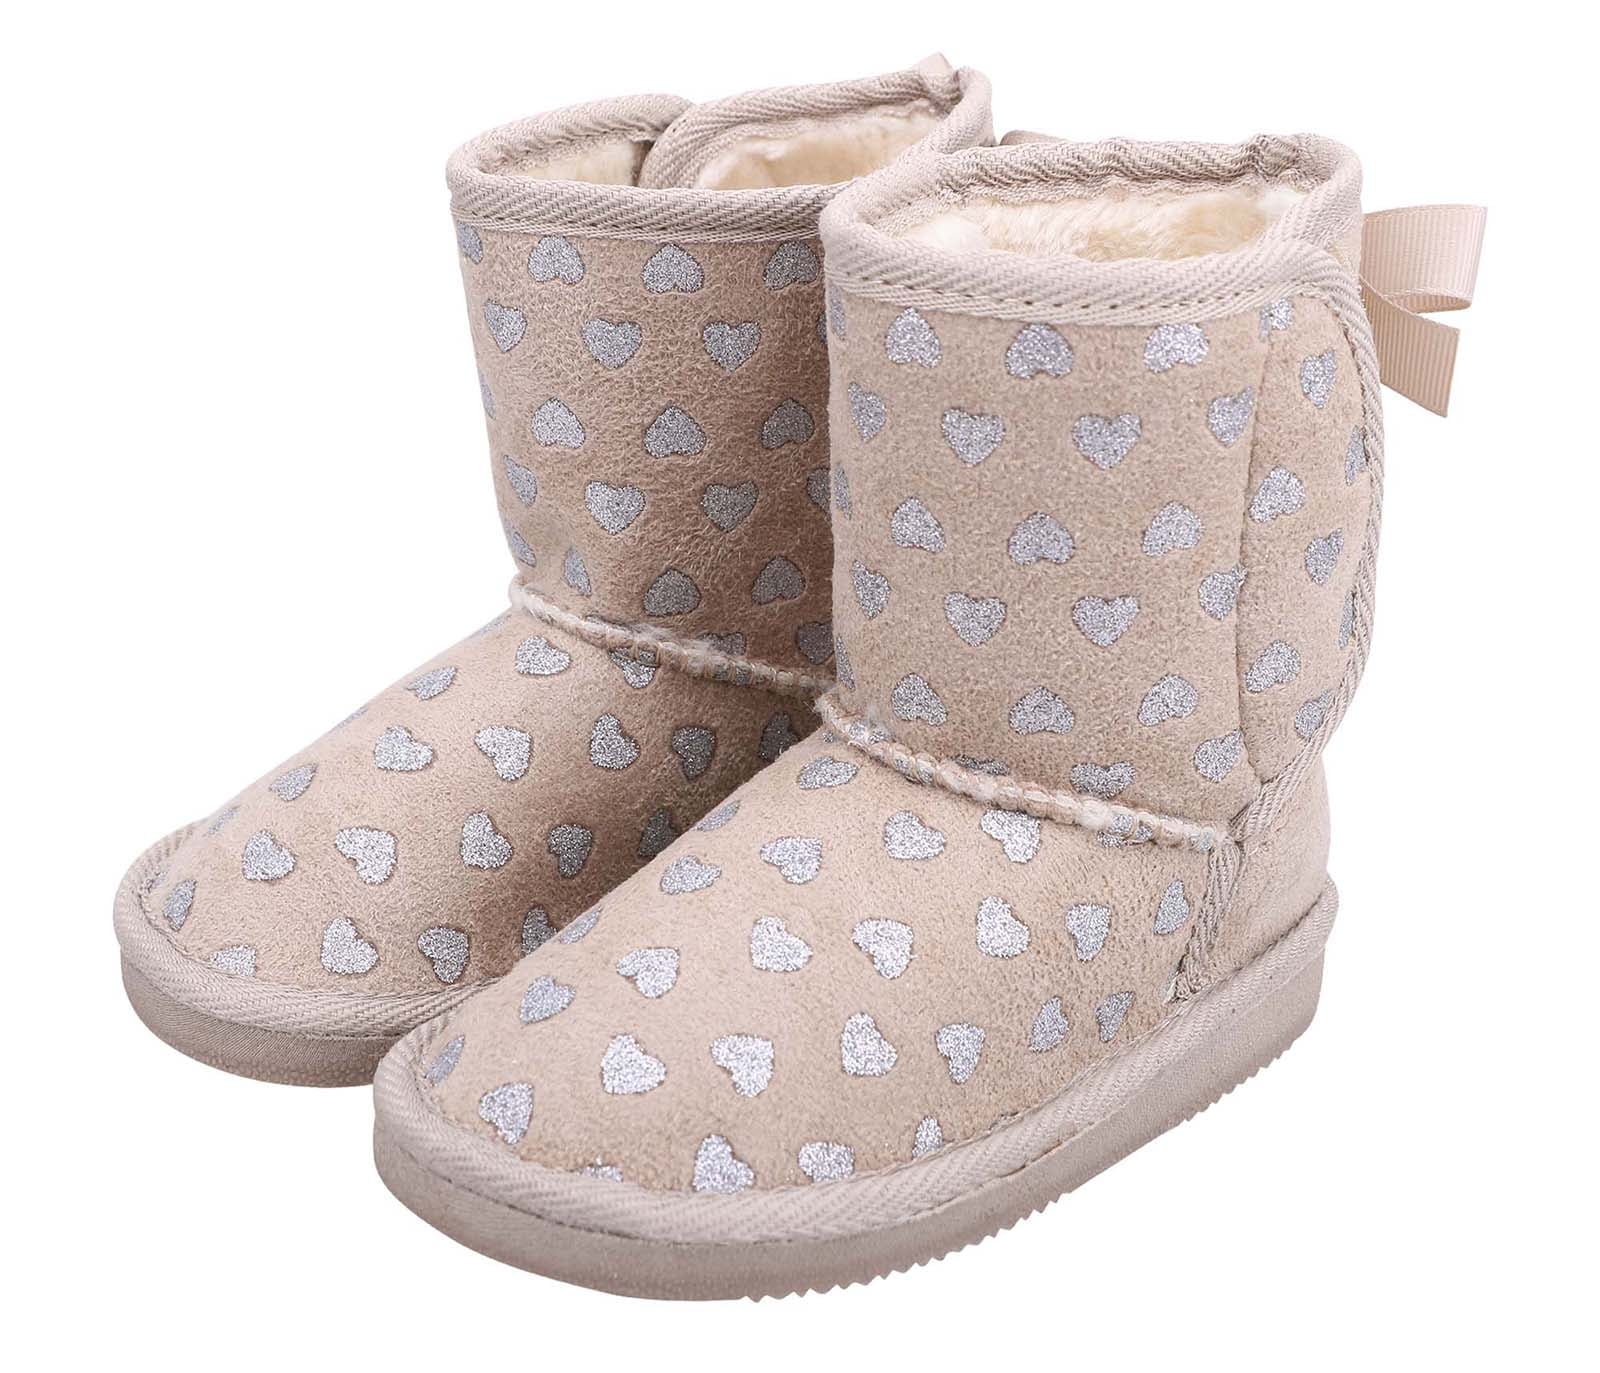 Goldweather Baby Girl Soft Booties Pure Color Bow High Gang Snow Boots Toddler First Walkers Warm Shoes 